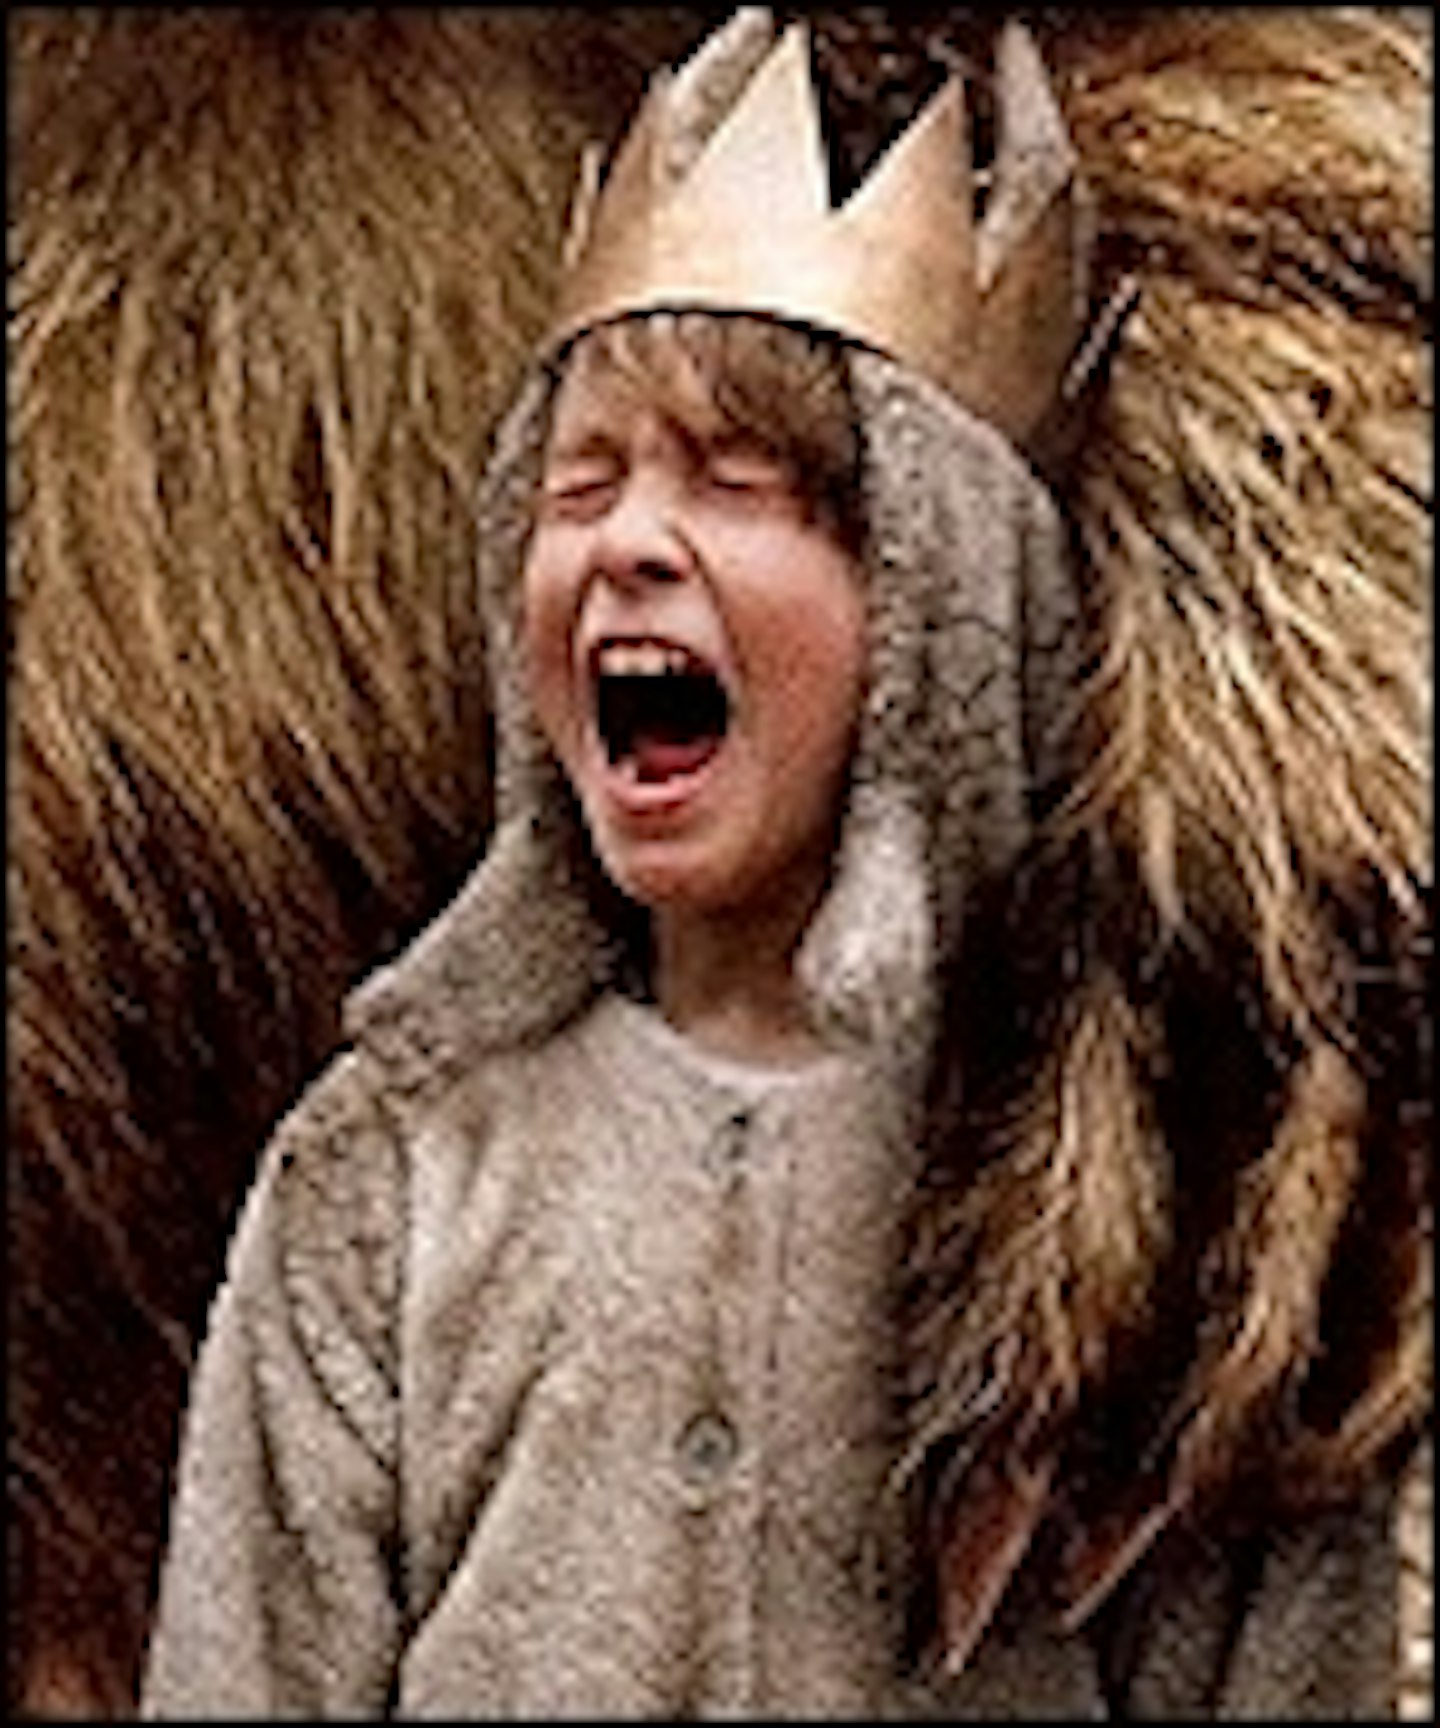 New Where The Wild Things Are Featurette